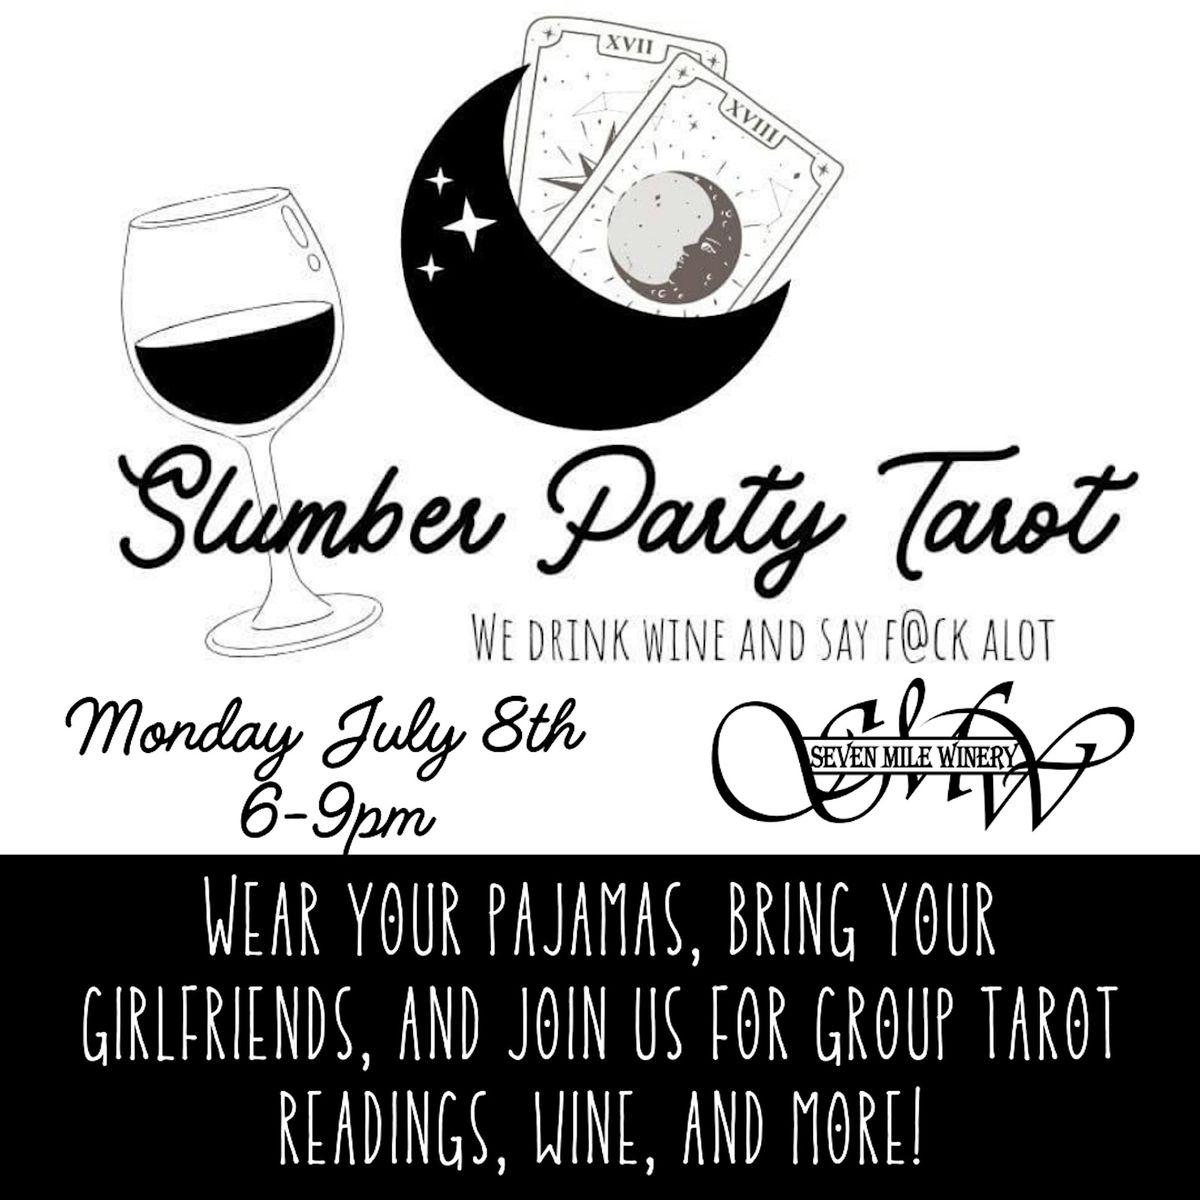 Slumber Party Tarot at Seven Mile Winery